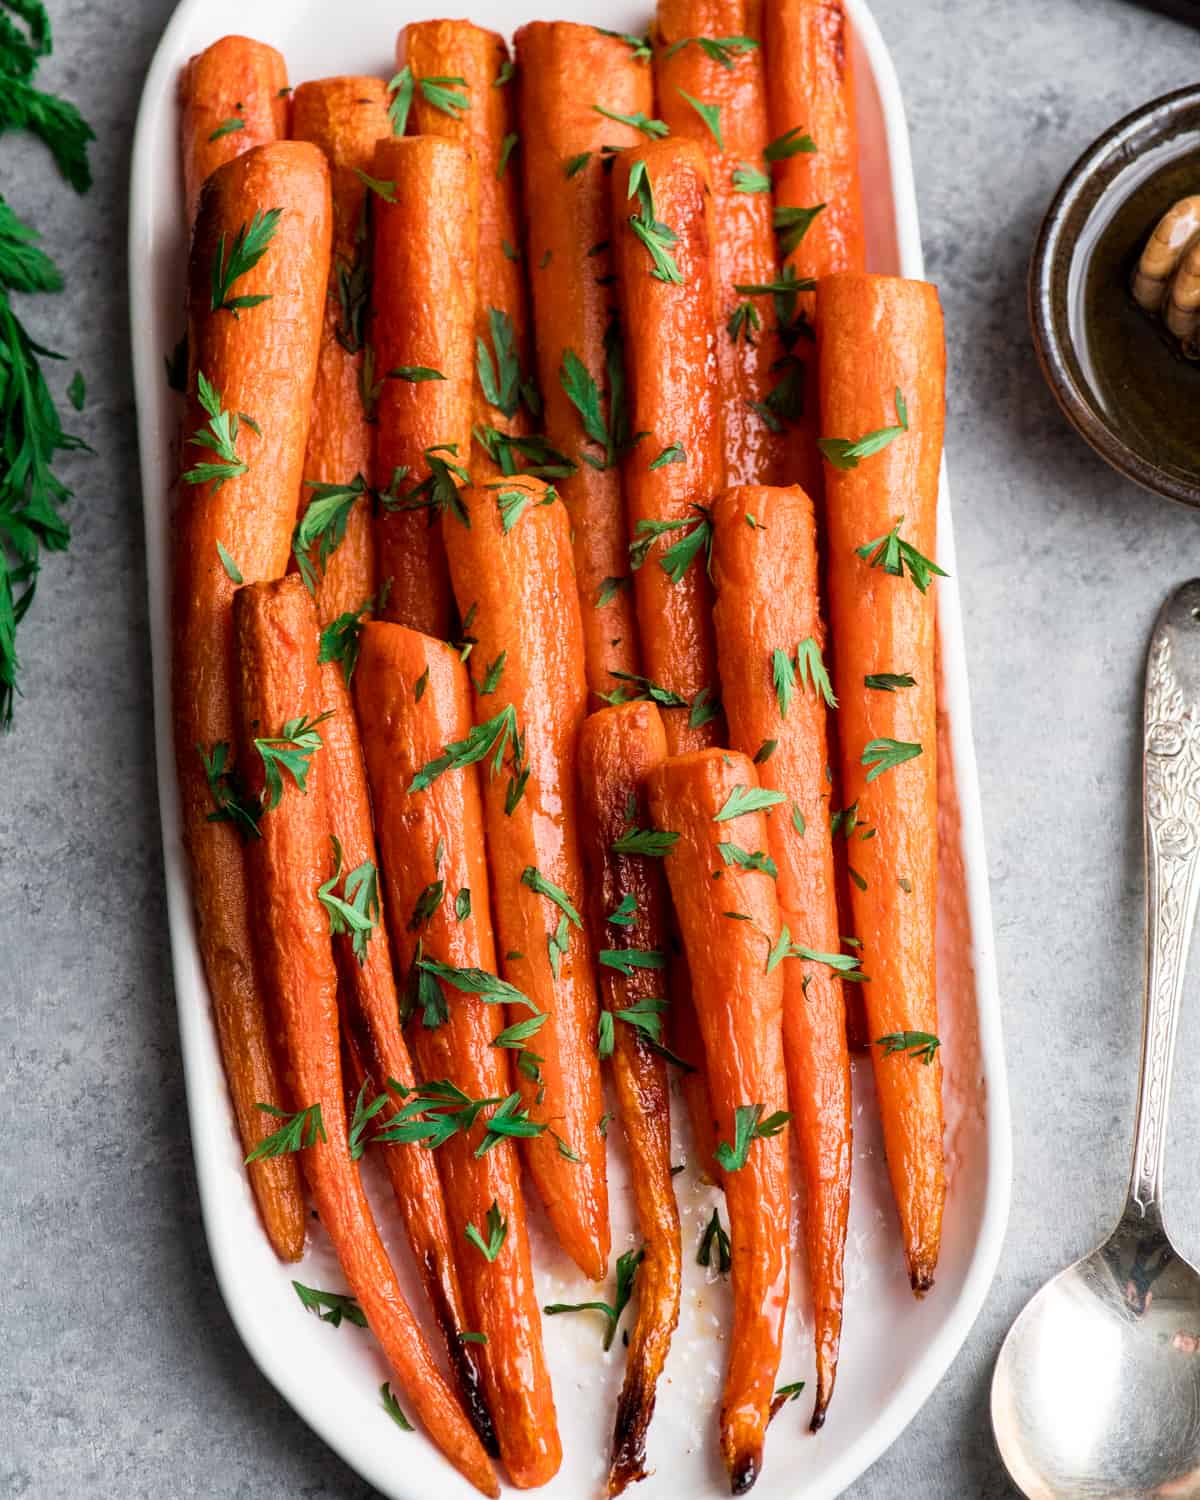 Overhead view of honey roasted carrots on an oval platter sprinkled with carrot greens